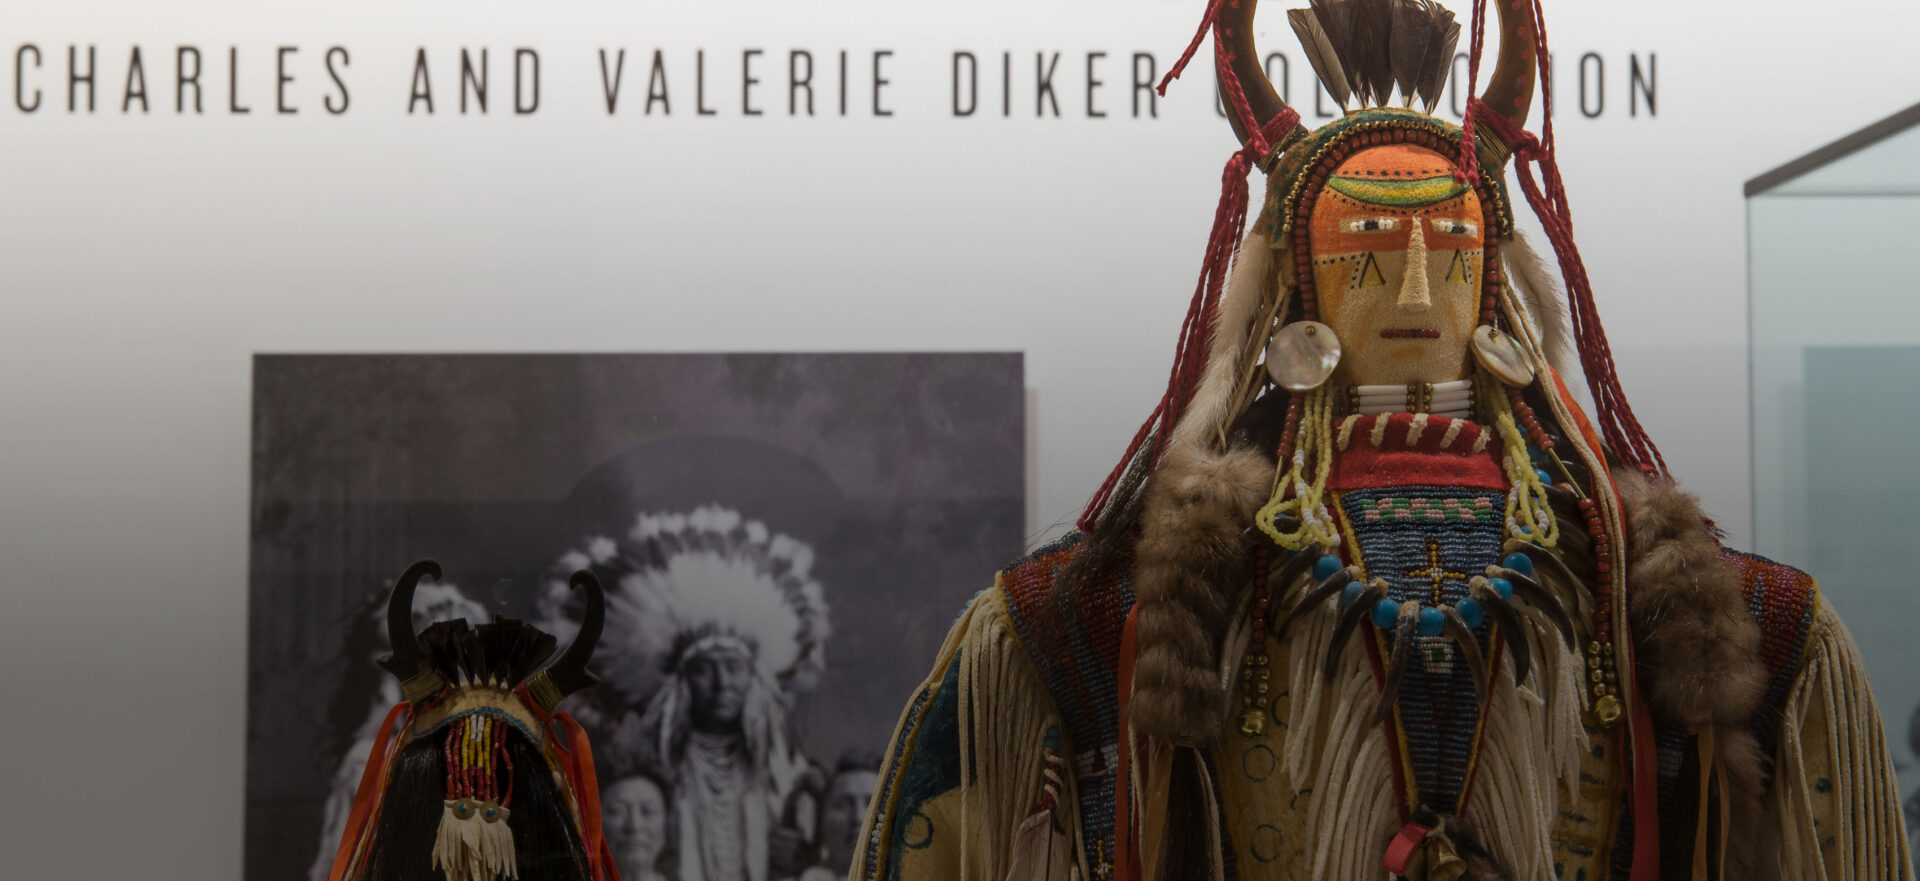 Contemporary Plains Indian Dolls on display in a gallery.